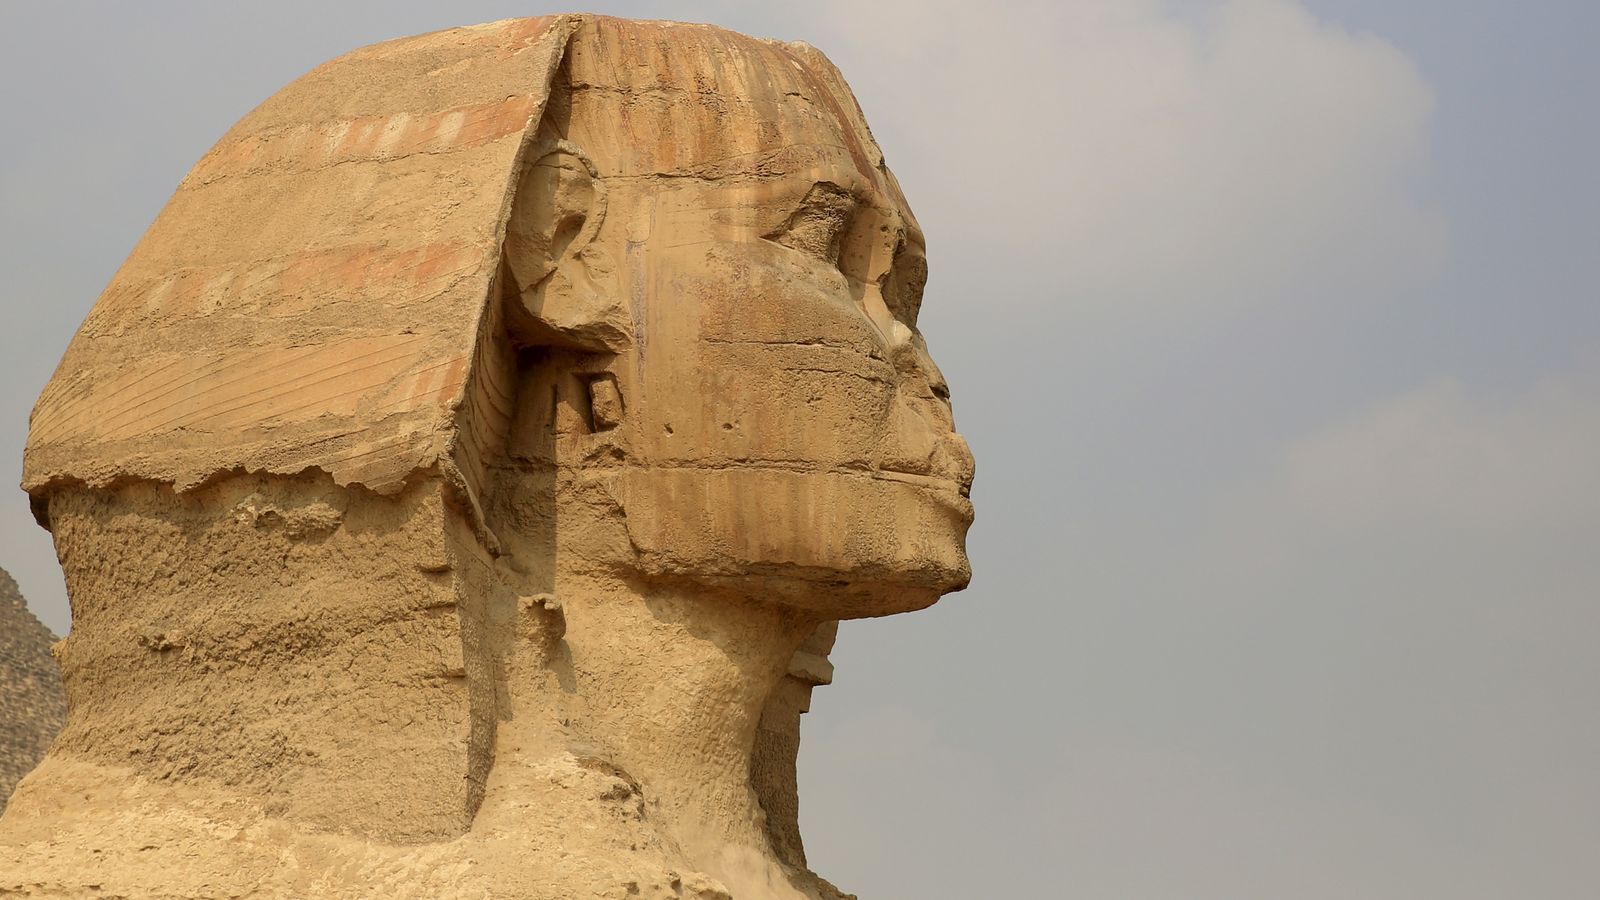 Scientists discover 'origin story' of Great Sphinx of Giza